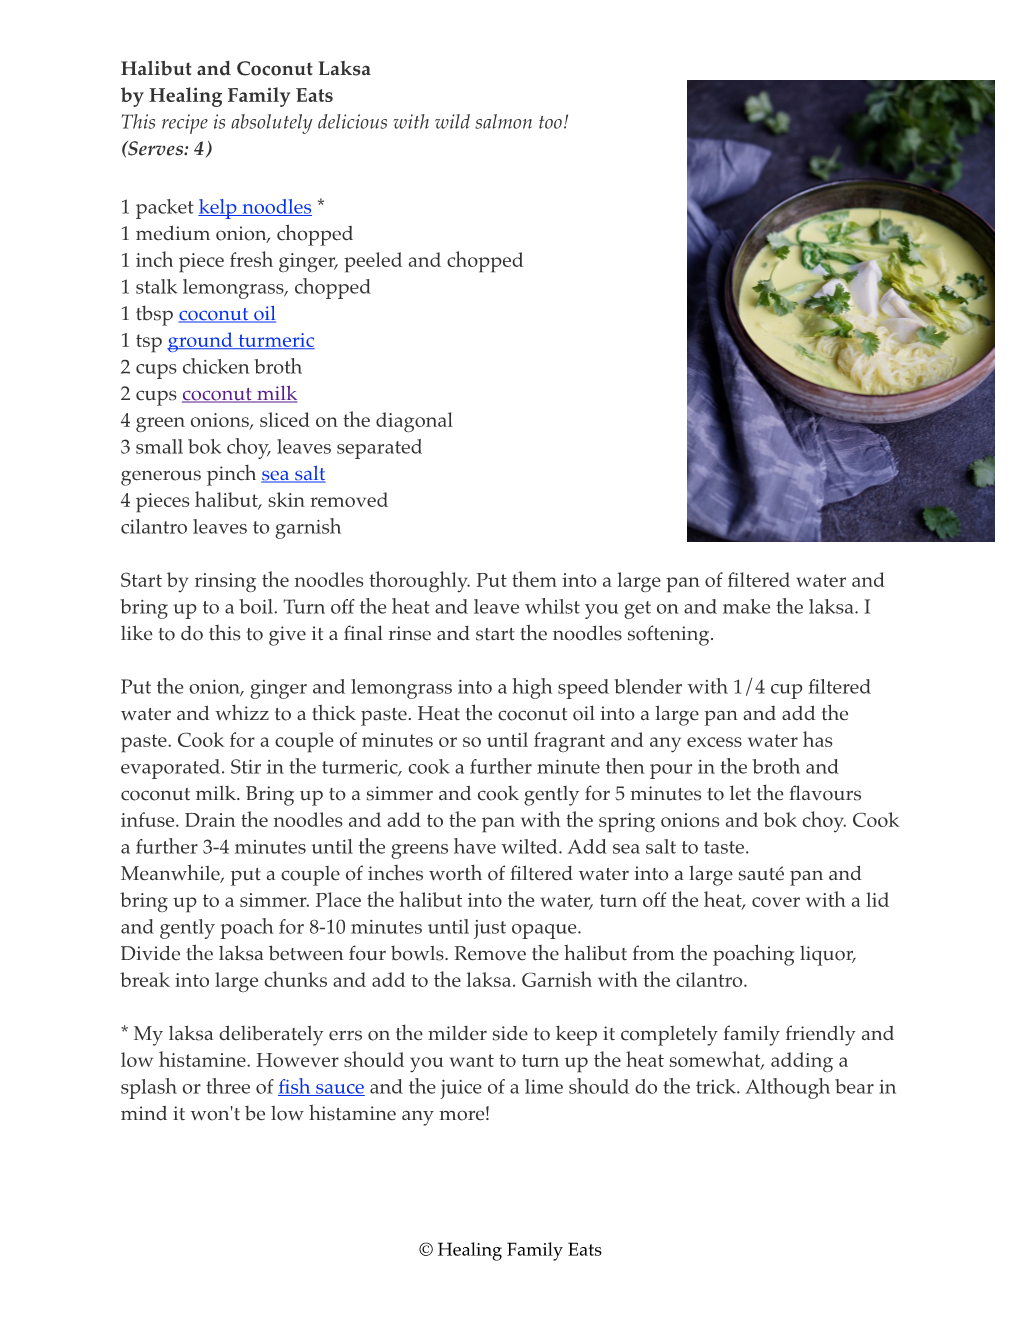 Halibut and Coconut Laksa by Healing Family Eats This Recipe Is Absolutely Delicious with Wild Salmon Too! (Serves: 4)